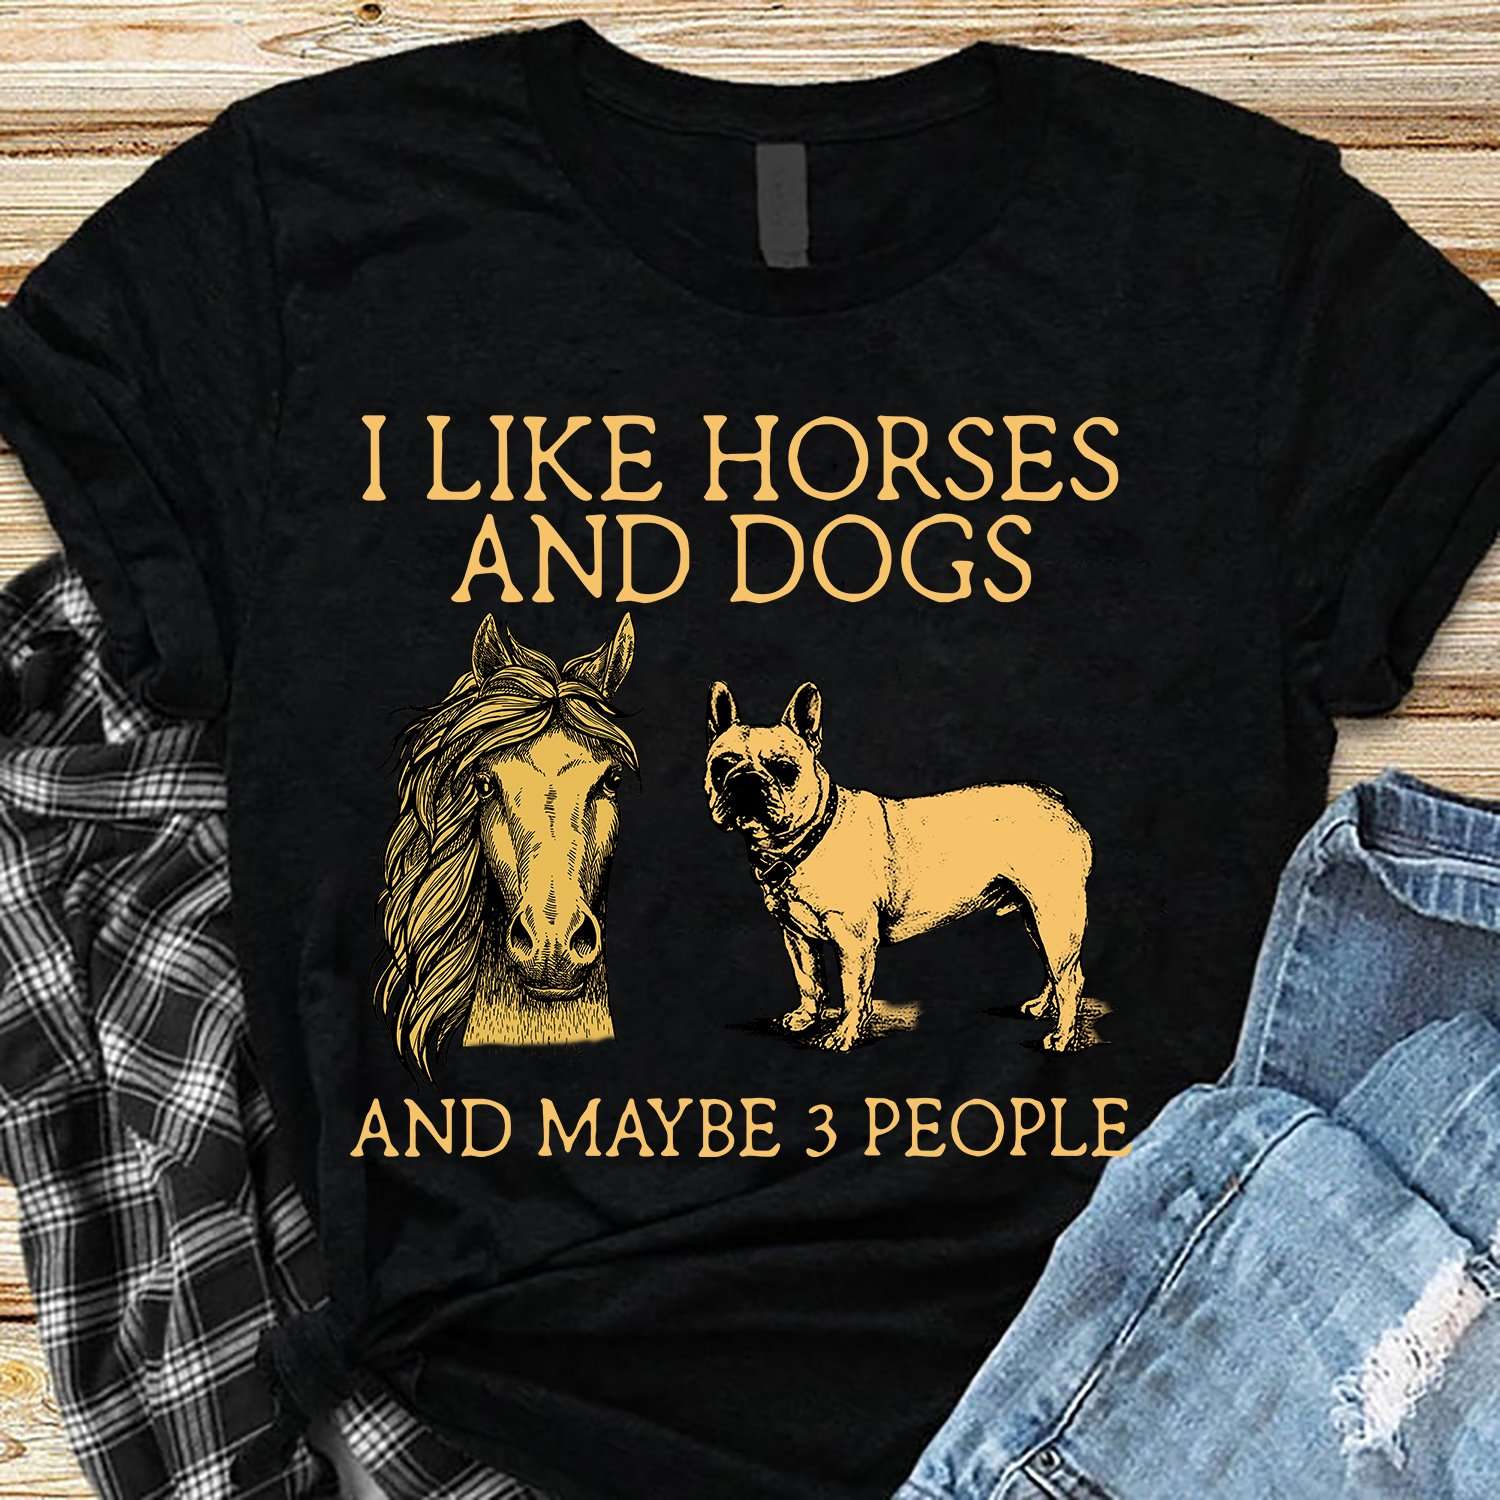 I like horses and dogs and maybe 3 people - Pug dog lover